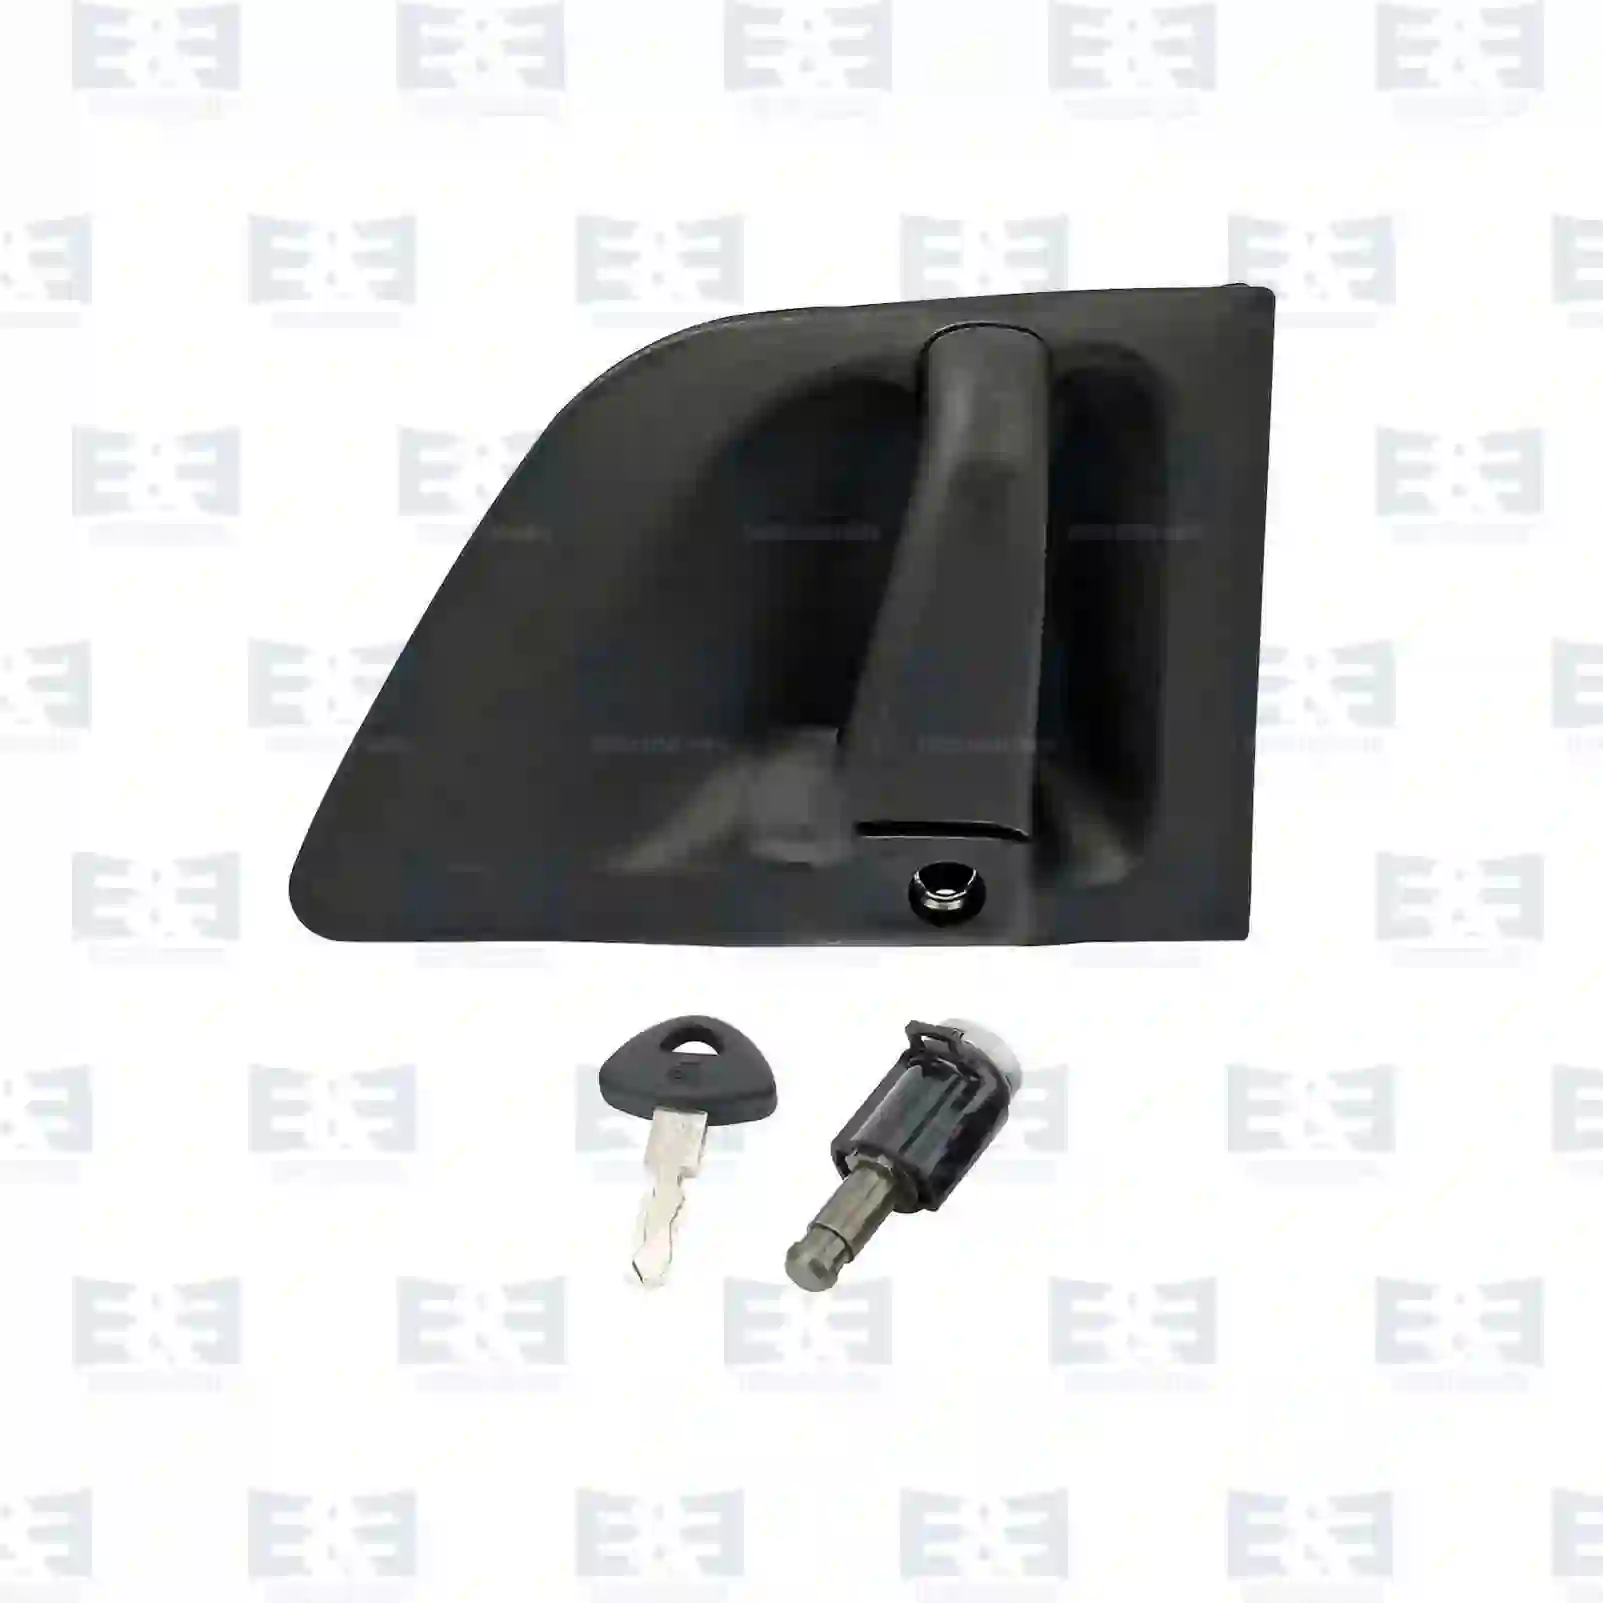 Door handle, left, complete with lock cylinder, 2E2289403, 2145647S ||  2E2289403 E&E Truck Spare Parts | Truck Spare Parts, Auotomotive Spare Parts Door handle, left, complete with lock cylinder, 2E2289403, 2145647S ||  2E2289403 E&E Truck Spare Parts | Truck Spare Parts, Auotomotive Spare Parts